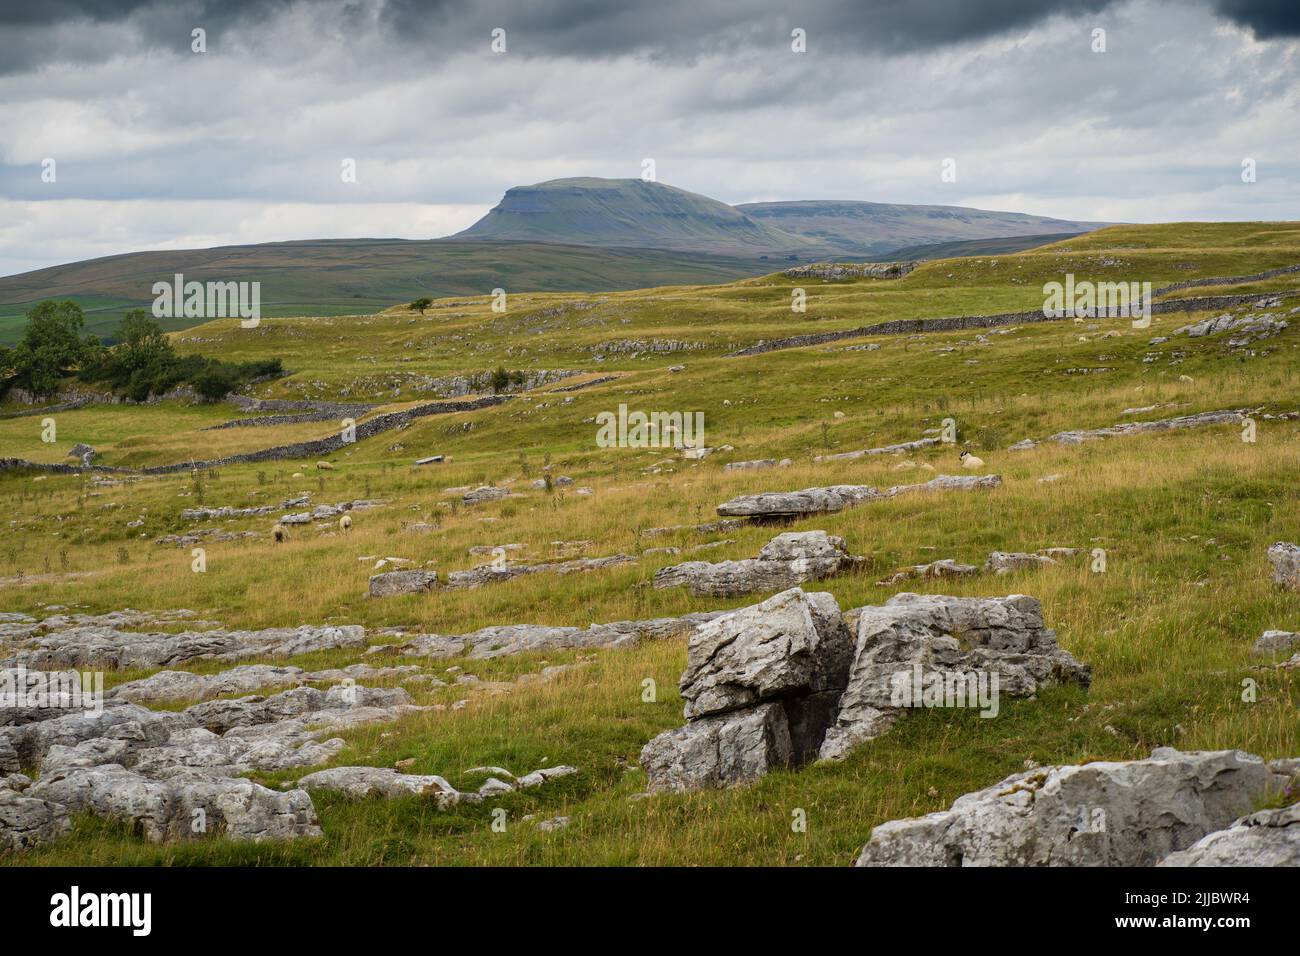 Penyghent is a fell in the Yorkshire Dales, England. It is the lowest of Yorkshire's Three Peaks at 2,277 feet (694 m); the other two being Ingleborou Stock Photo